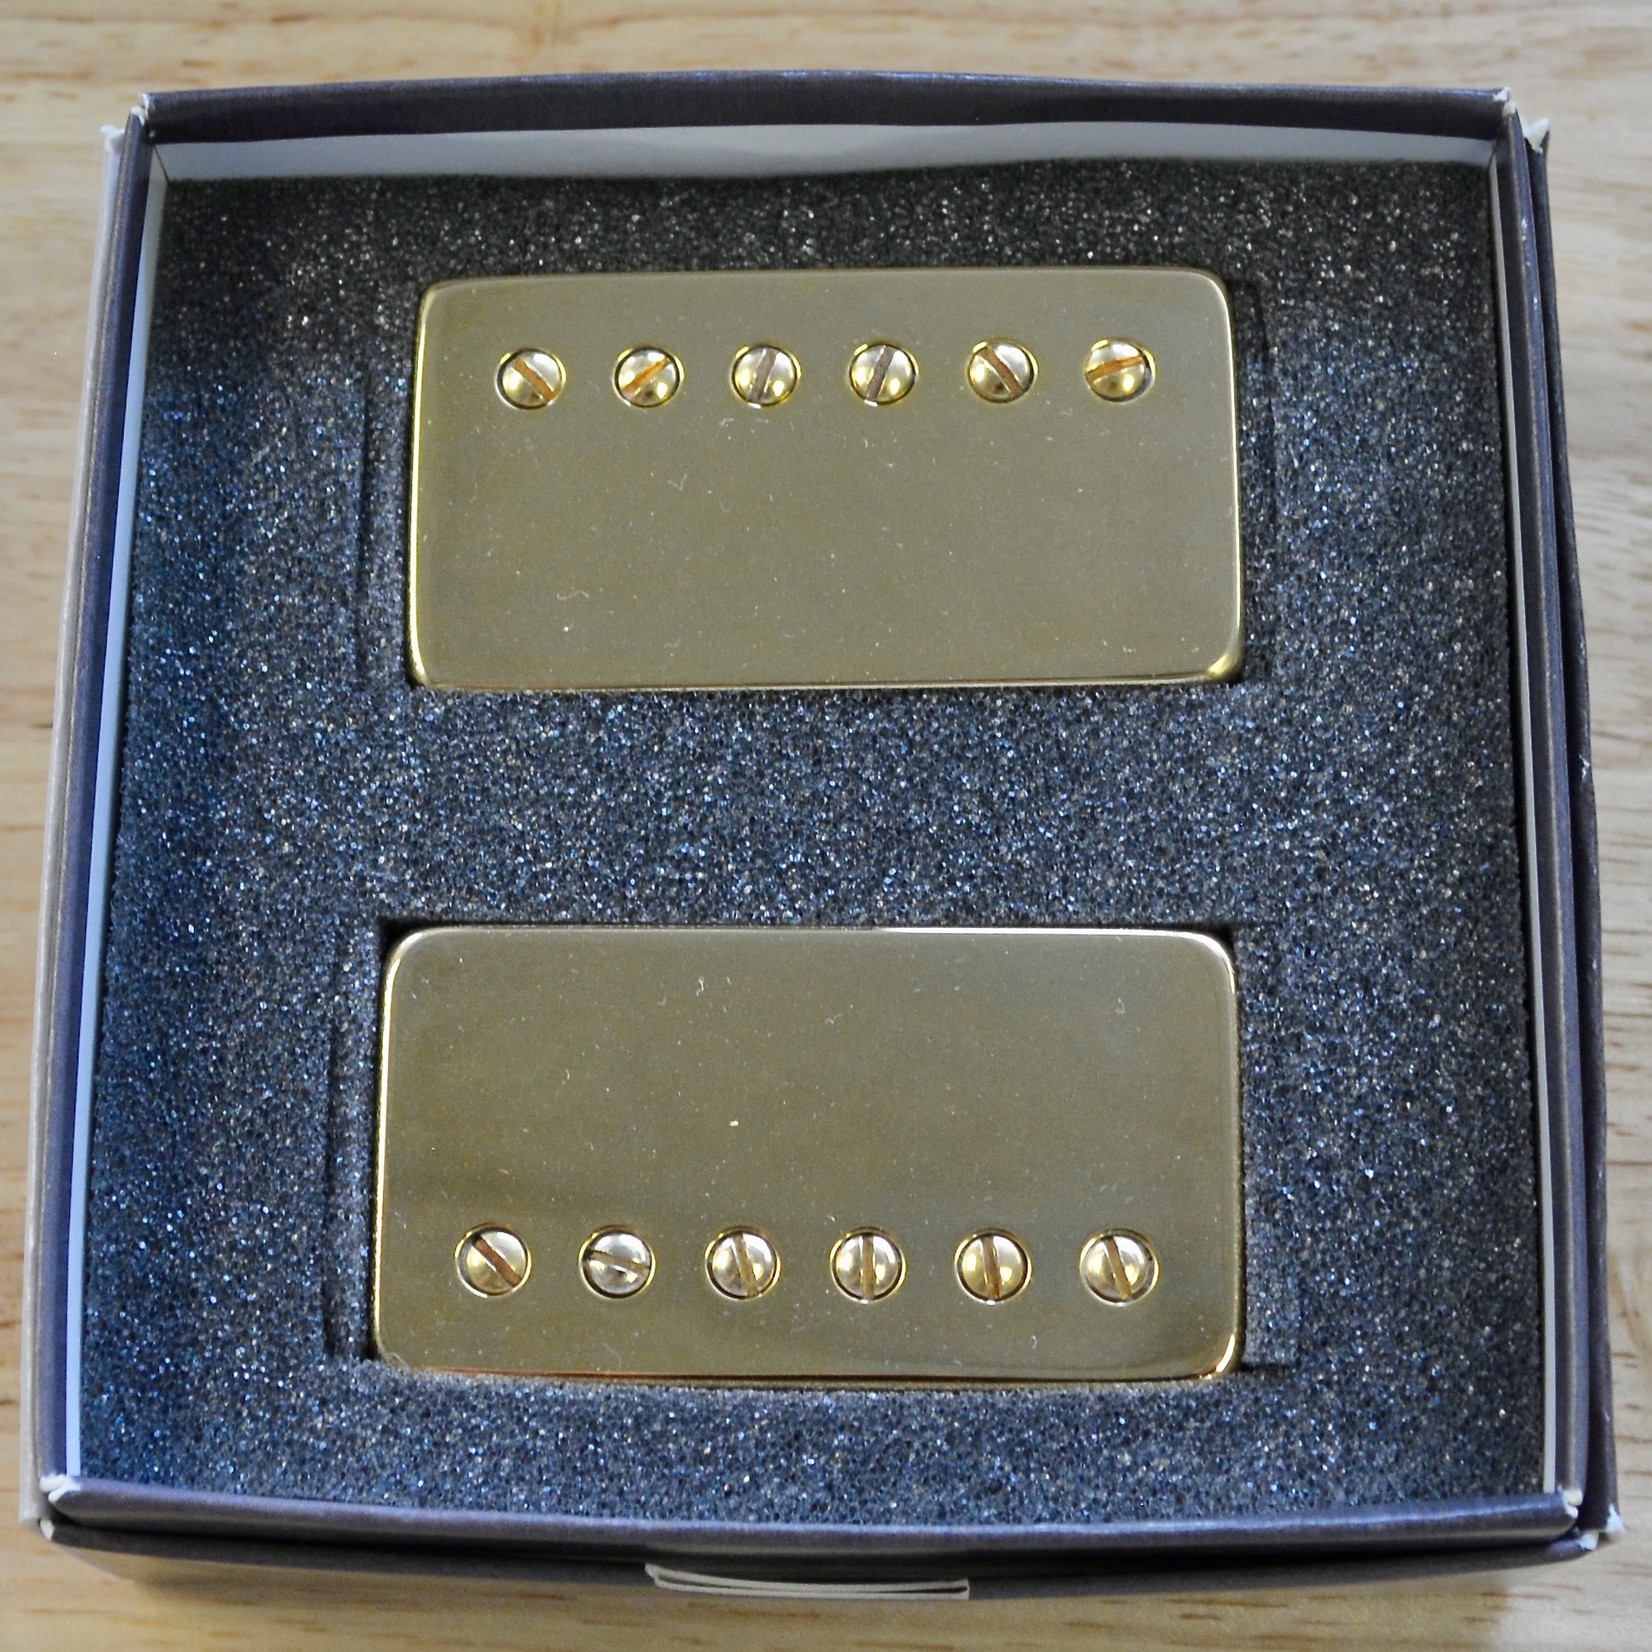 Bare Knuckle Bare Knuckle Bootcamp Brute Force Humbucker Set Gold